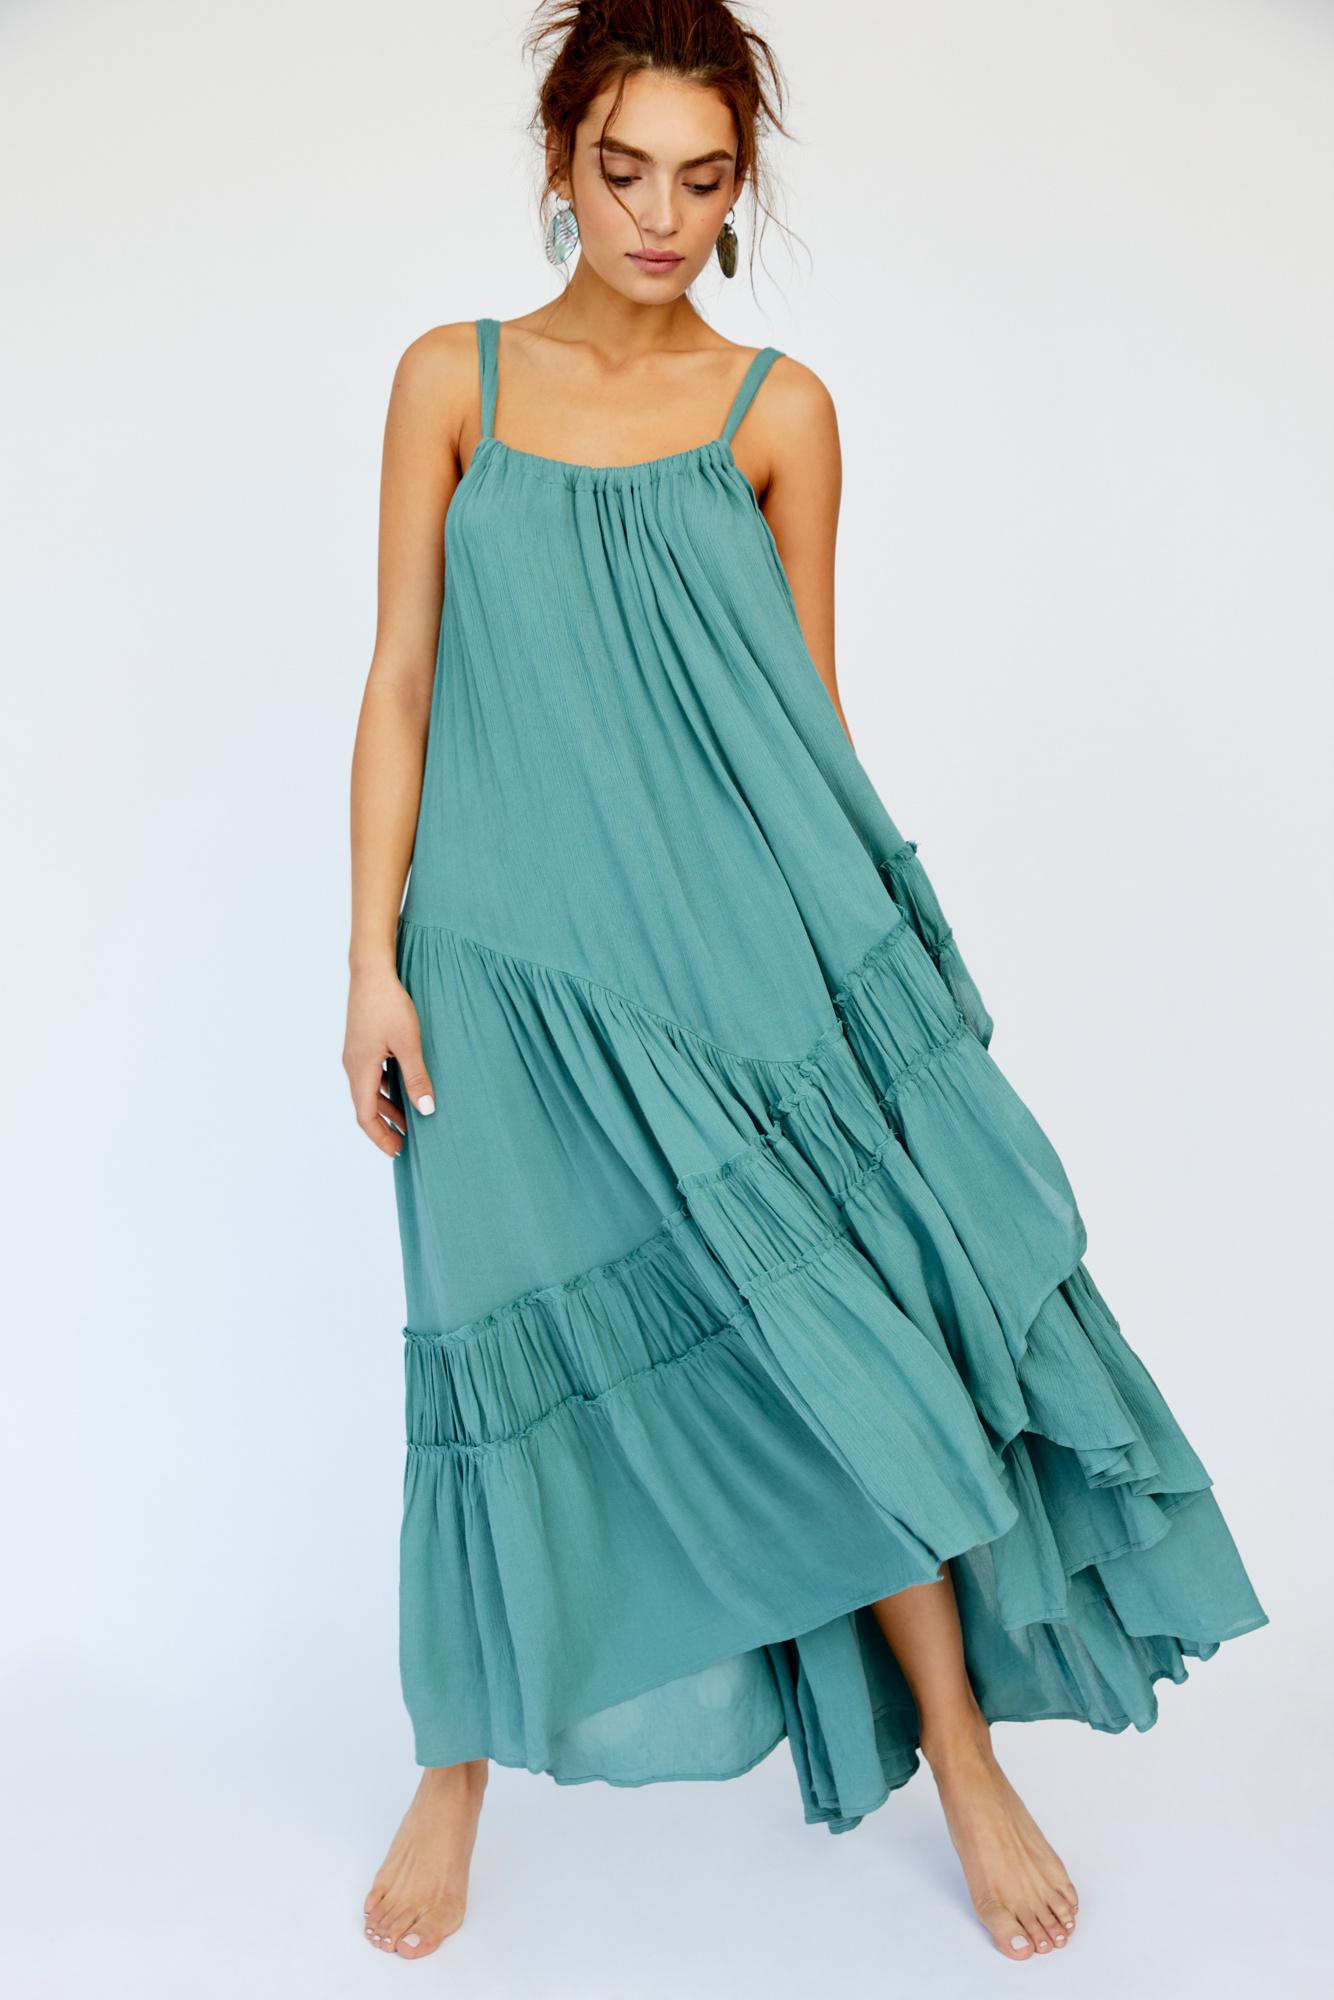 Free People Bare It All Maxi Dress By Endless Summer in Blue - Lyst